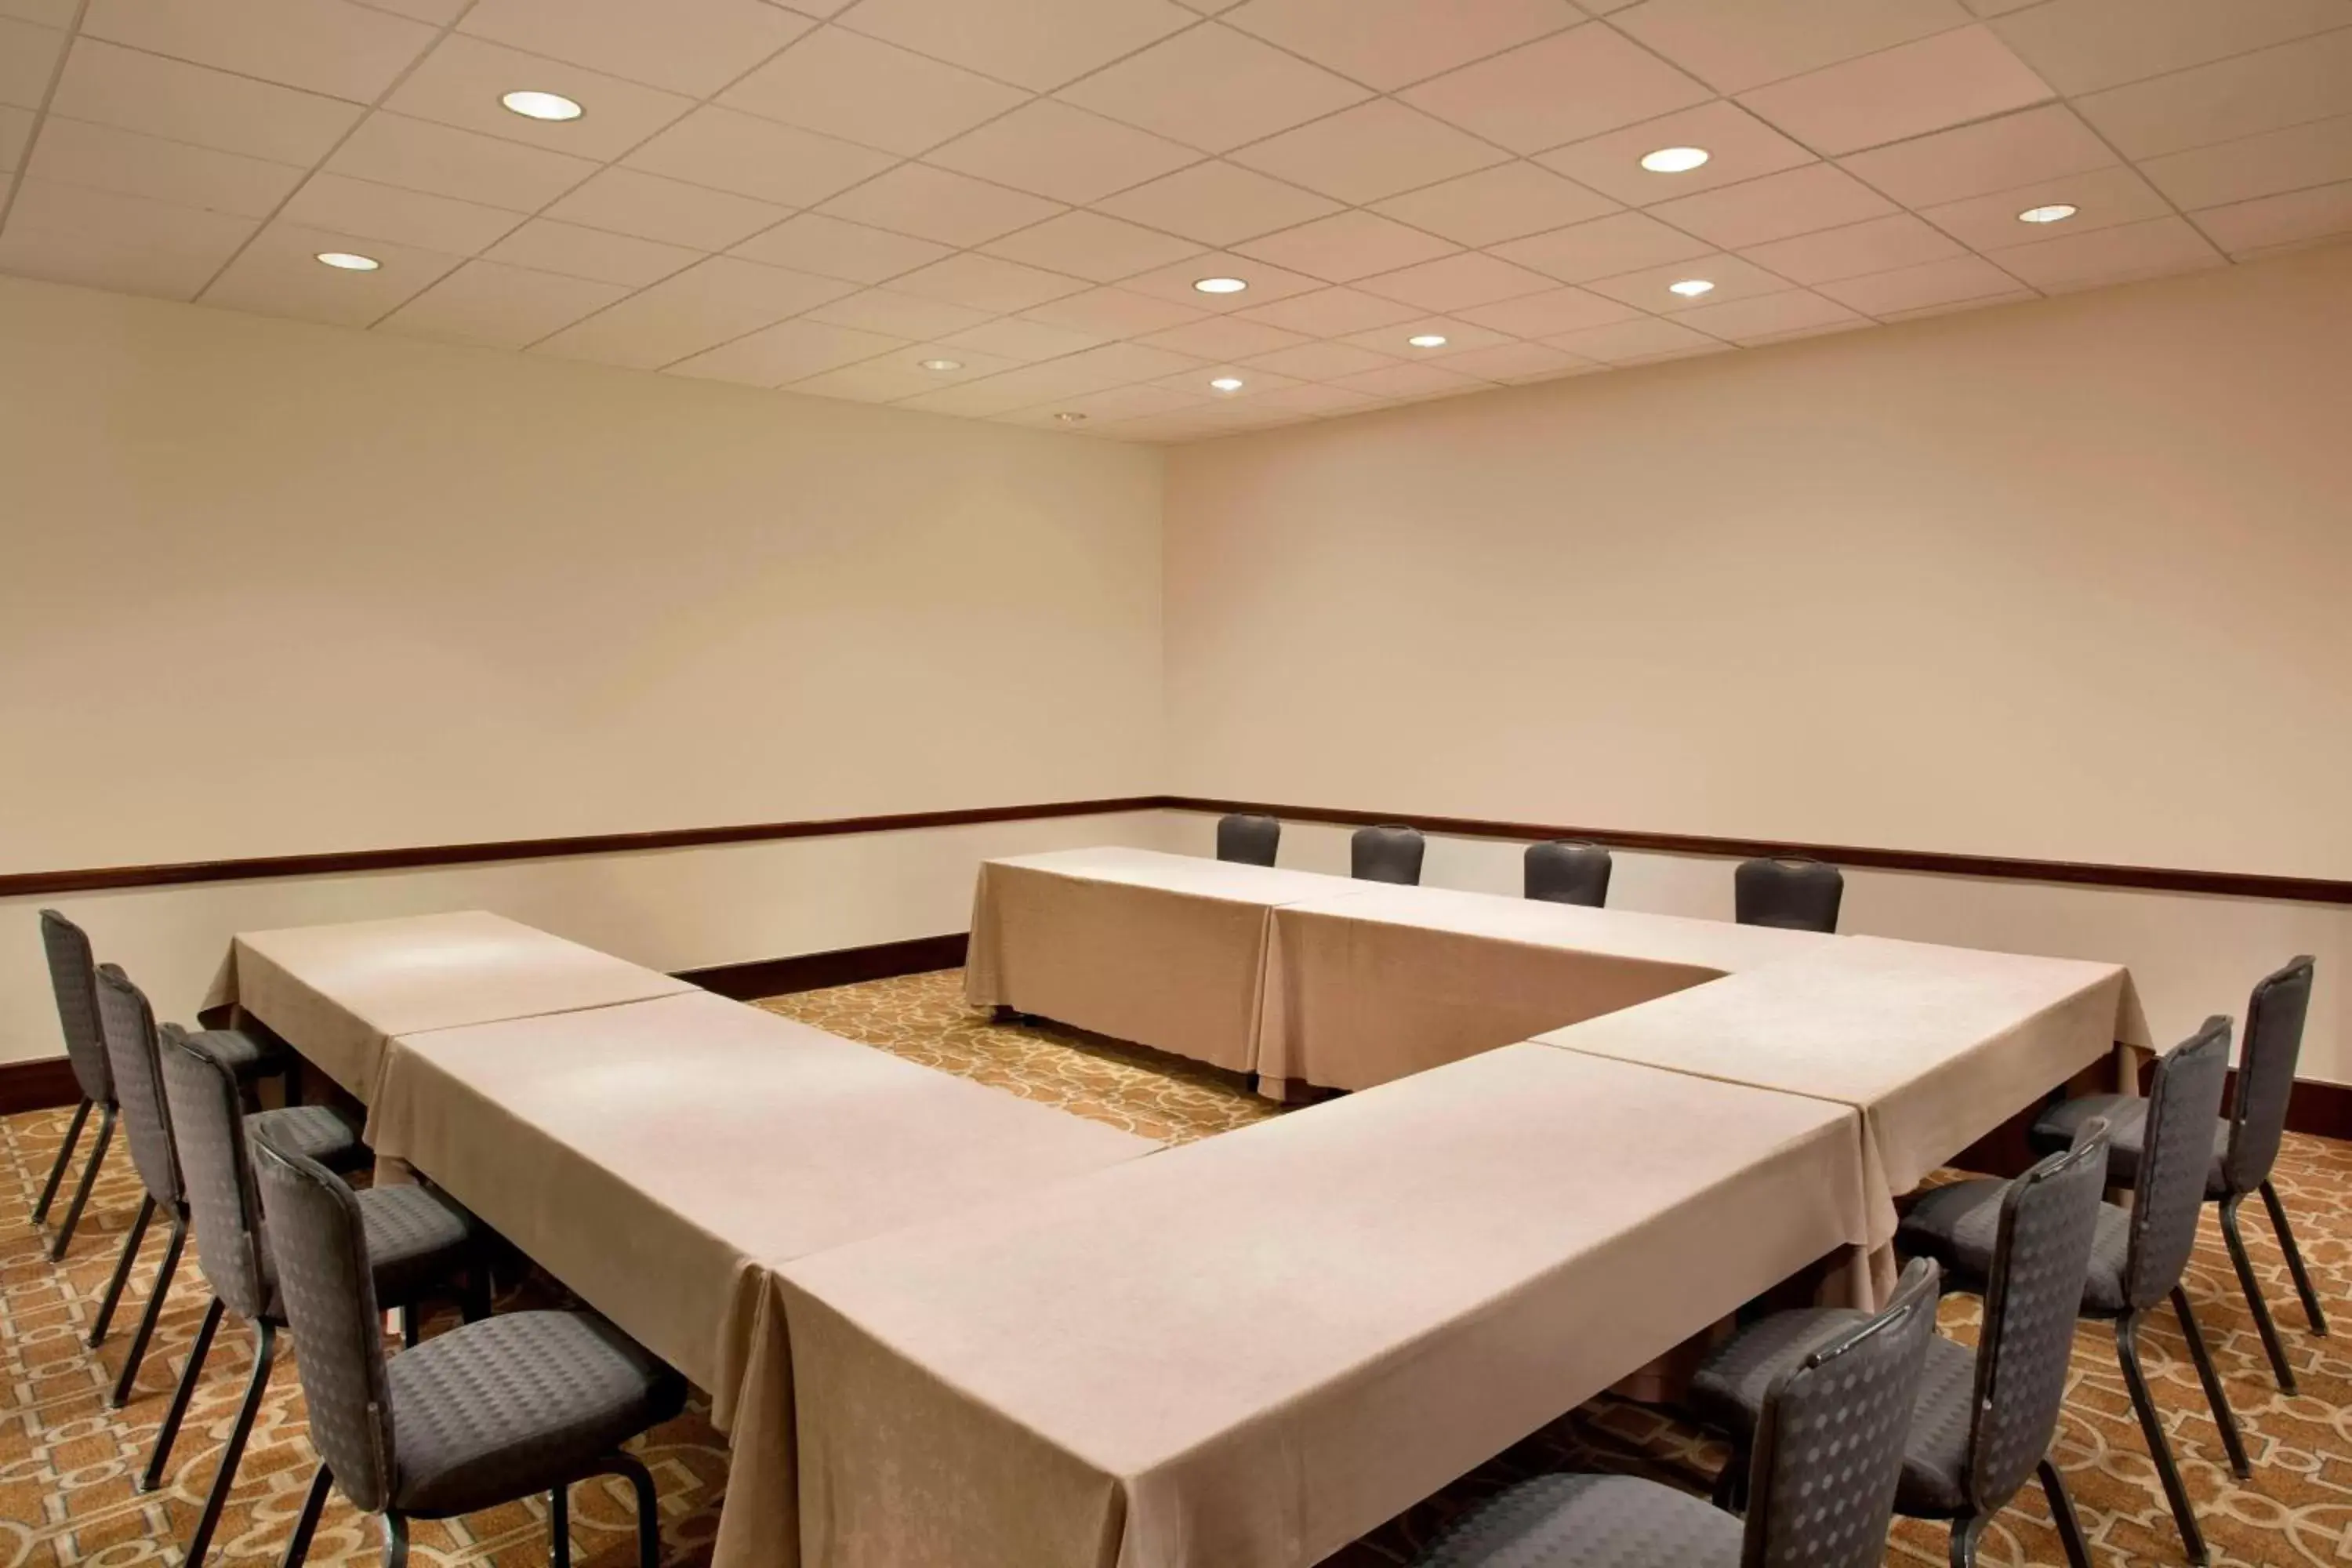 Meeting/conference room in Sheraton Kansas City Hotel at Crown Center